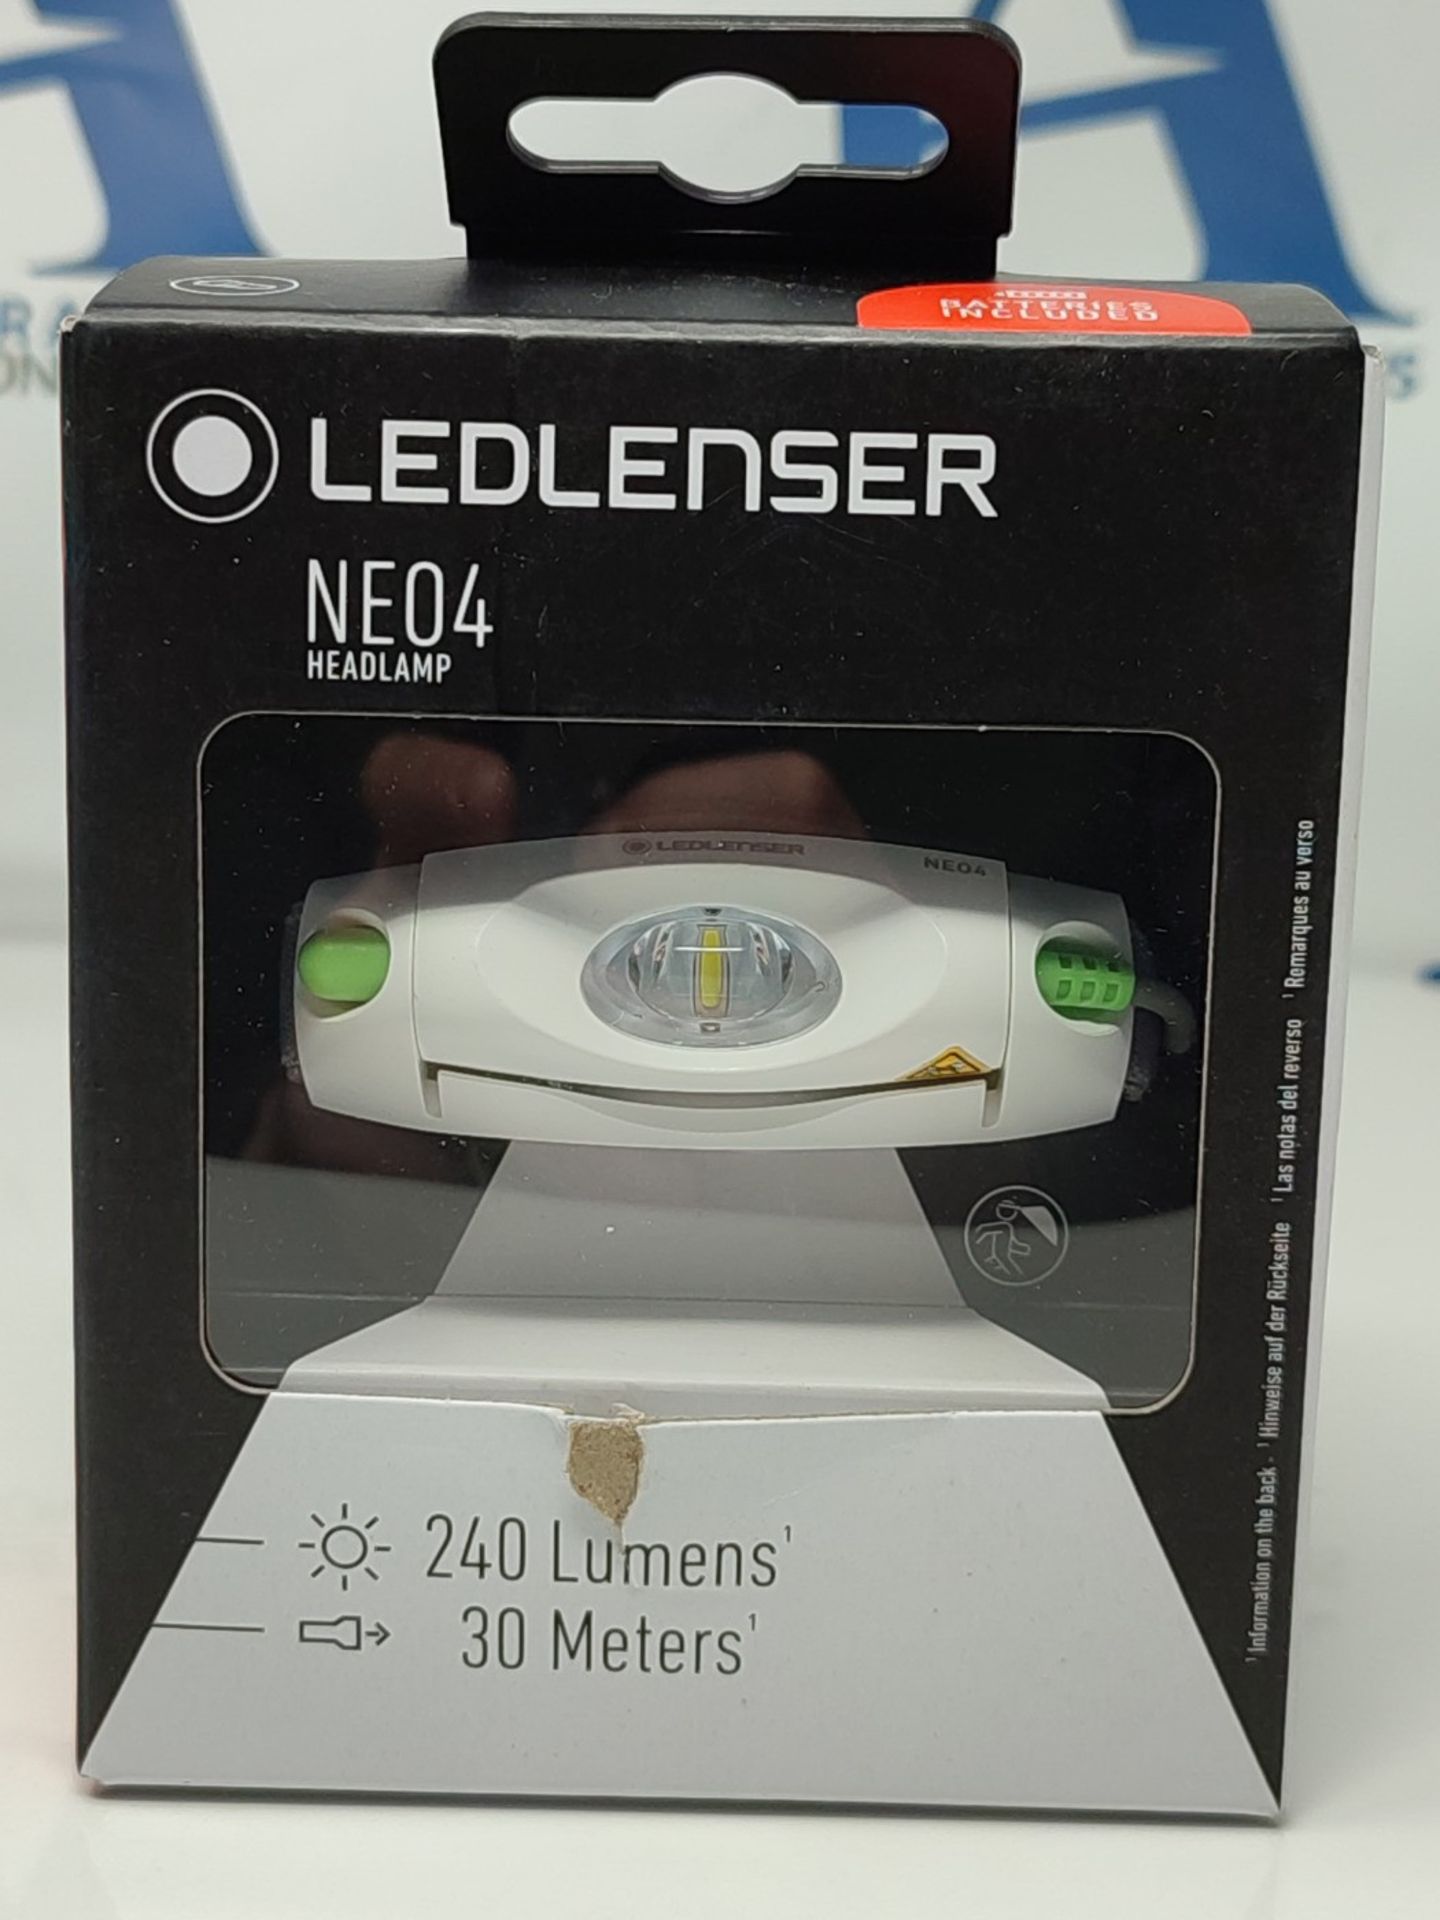 Ledlenser NEO4 Green Battery Operated LED Head Torch, Super Bright 240 Lumens Headlamp - Image 2 of 3